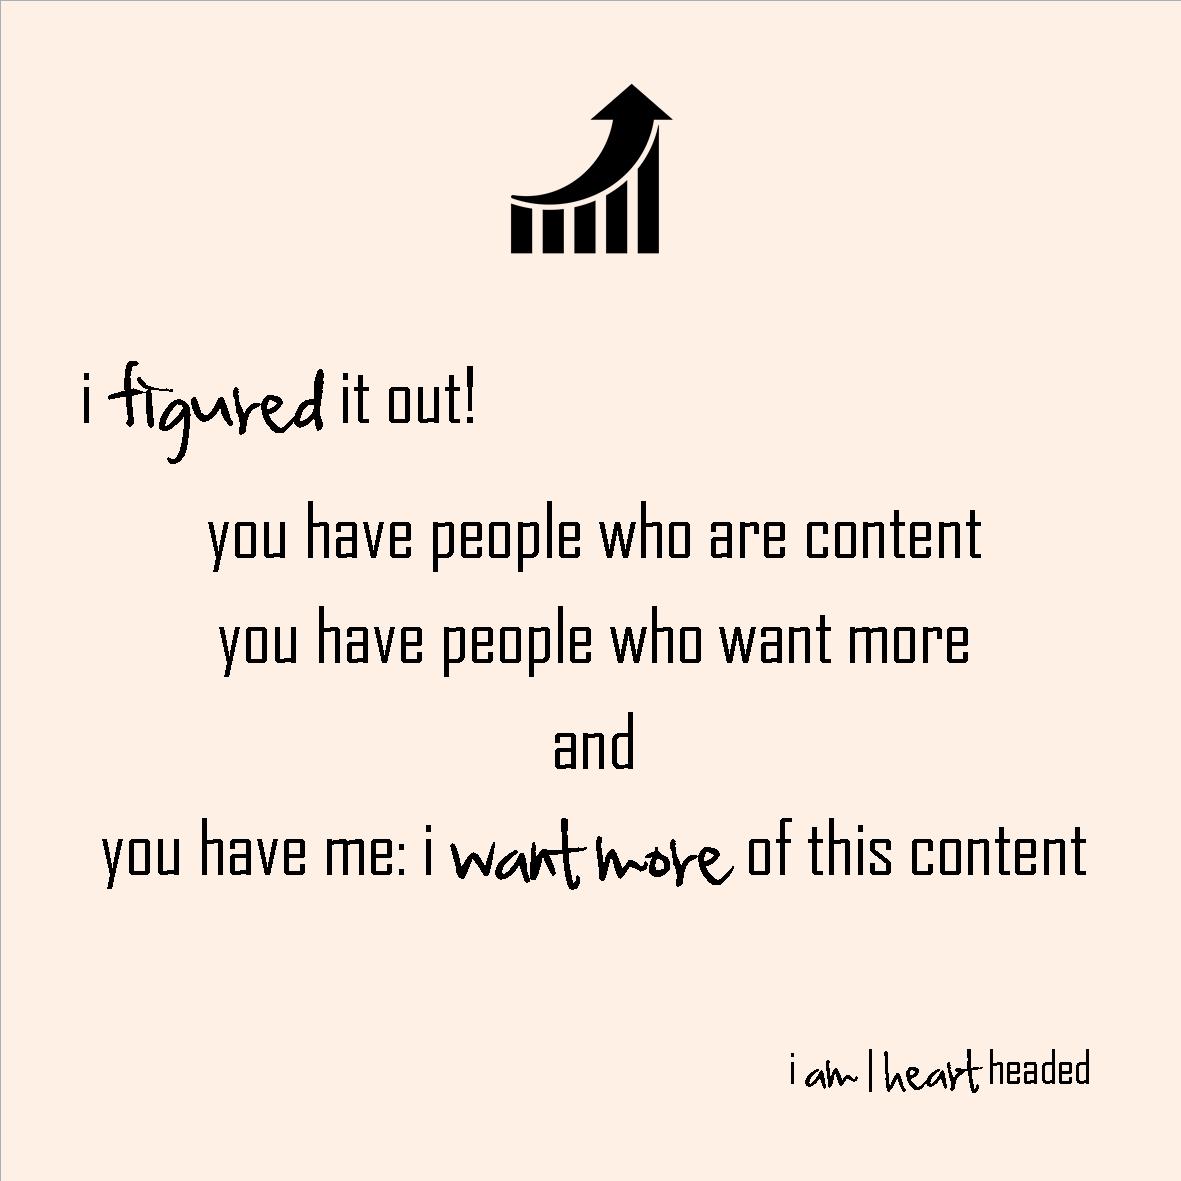 full-size featured image of quote 'more of content' in category 'wacky' at i am | heart headed